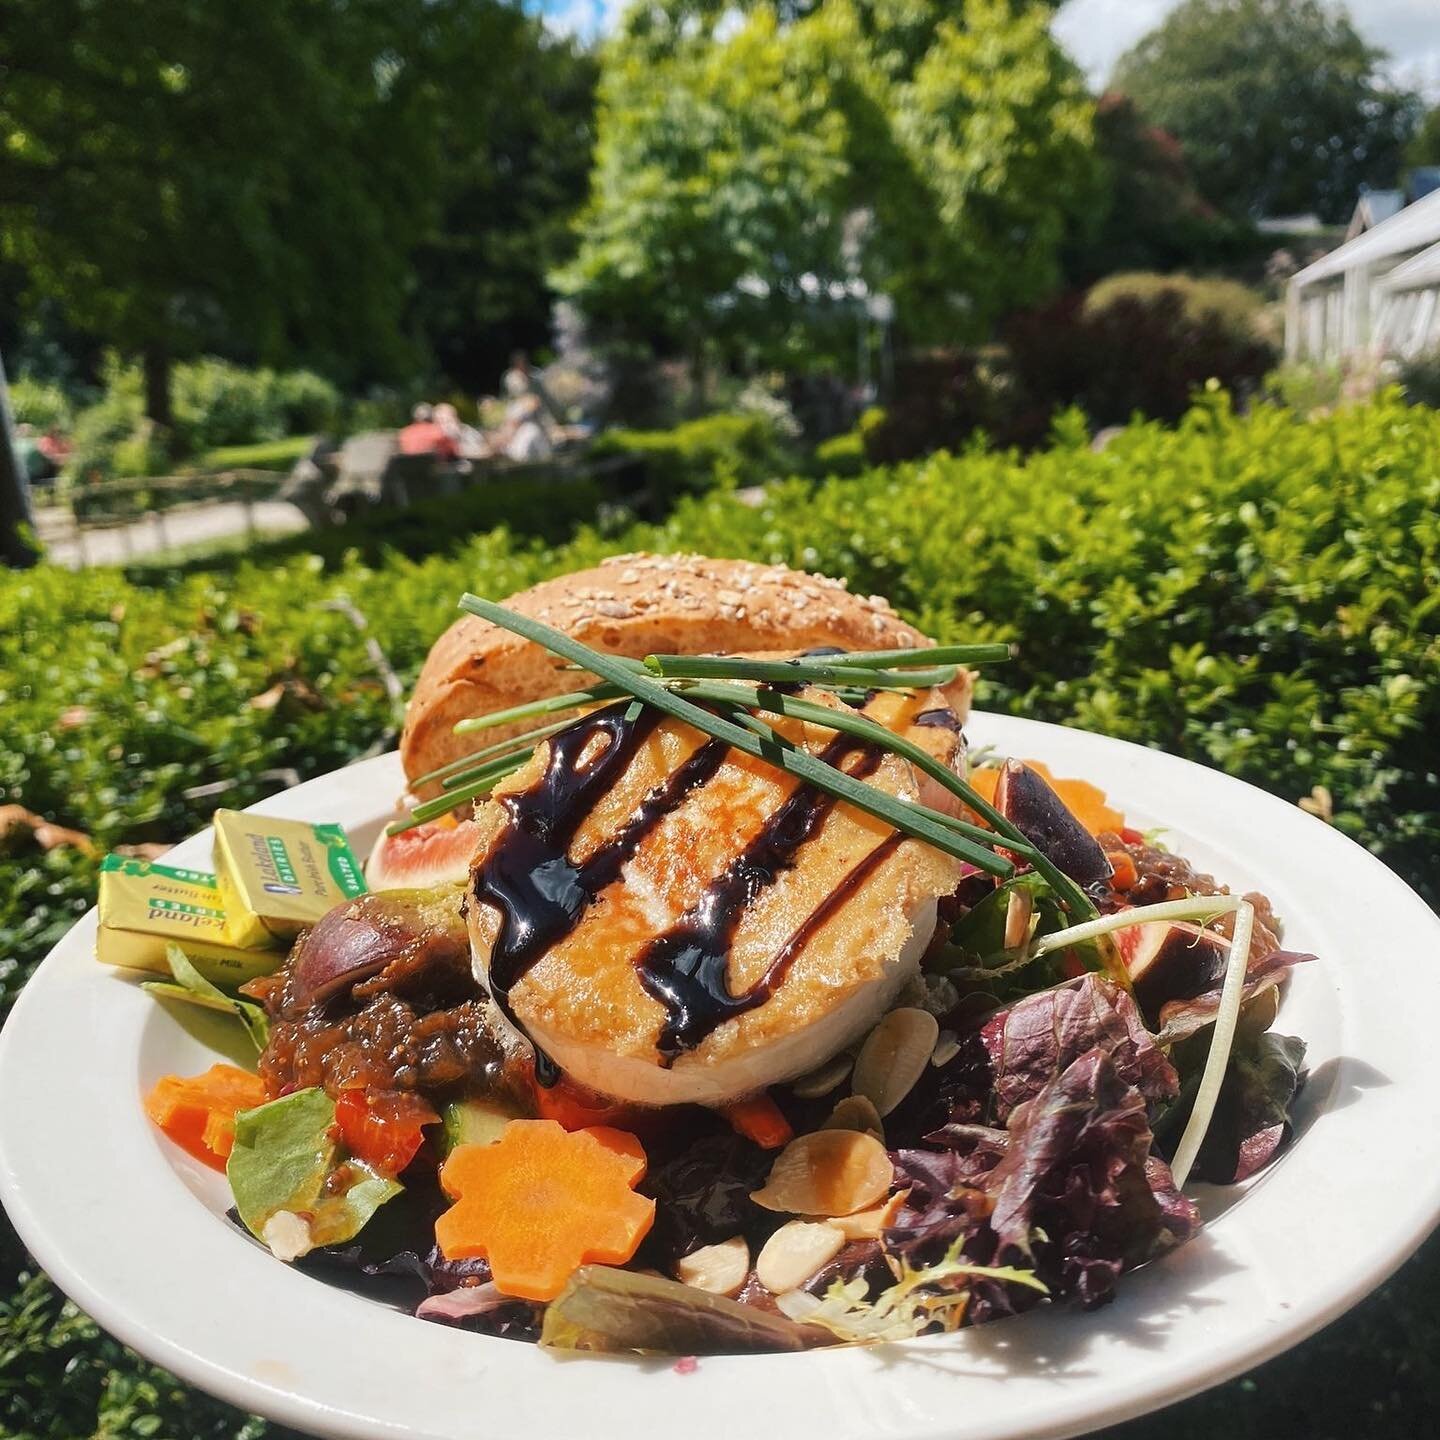 sᴘʀɪɴɢ ᴛɪᴍᴇ sᴀʟᴀᴅs.

The perfect lunch to enjoy in our gardens. Here&rsquo;s our Roast Fig &amp; Goat&rsquo;s Cheese Salad, served with mixed leaves, balsamic syrup, toasted almonds and chutney. Yum! 🥗☀️
.
.
.
.
.
#wyresdale #wyresdalepark #applesto